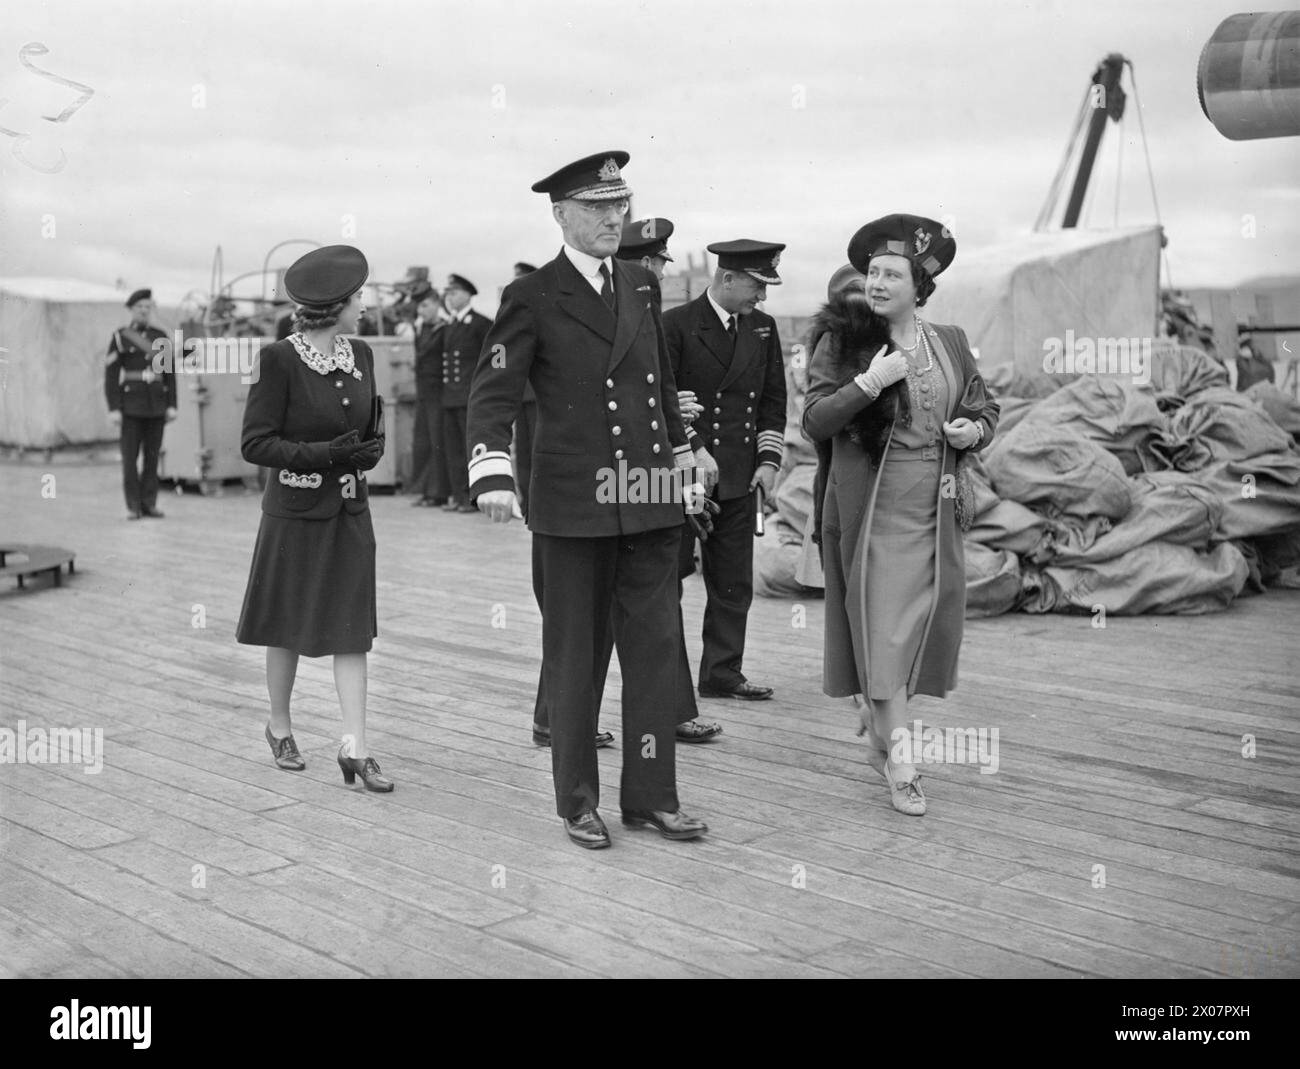 ROYAL VISIT TO HMS KING GEORGE V. 29 OCTOBER 1944, GREENOCK. THE KING AND QUEEN ACCOMPANIED BY PRINCESS ELIZABETH AND PRINCESS MARGARET PAID A FAREWELL VISIT TO THE BATTLESHIP HMS KING GEORGE V BEFORE SHE LEFT TO JOIN BRITAIN'S EAST INDIES FLEET. - The Queen on the quarterdeck of the battleship with Rear Admiral Sir Richard Hill, Fleet Officer in Charge, Greenock Stock Photo